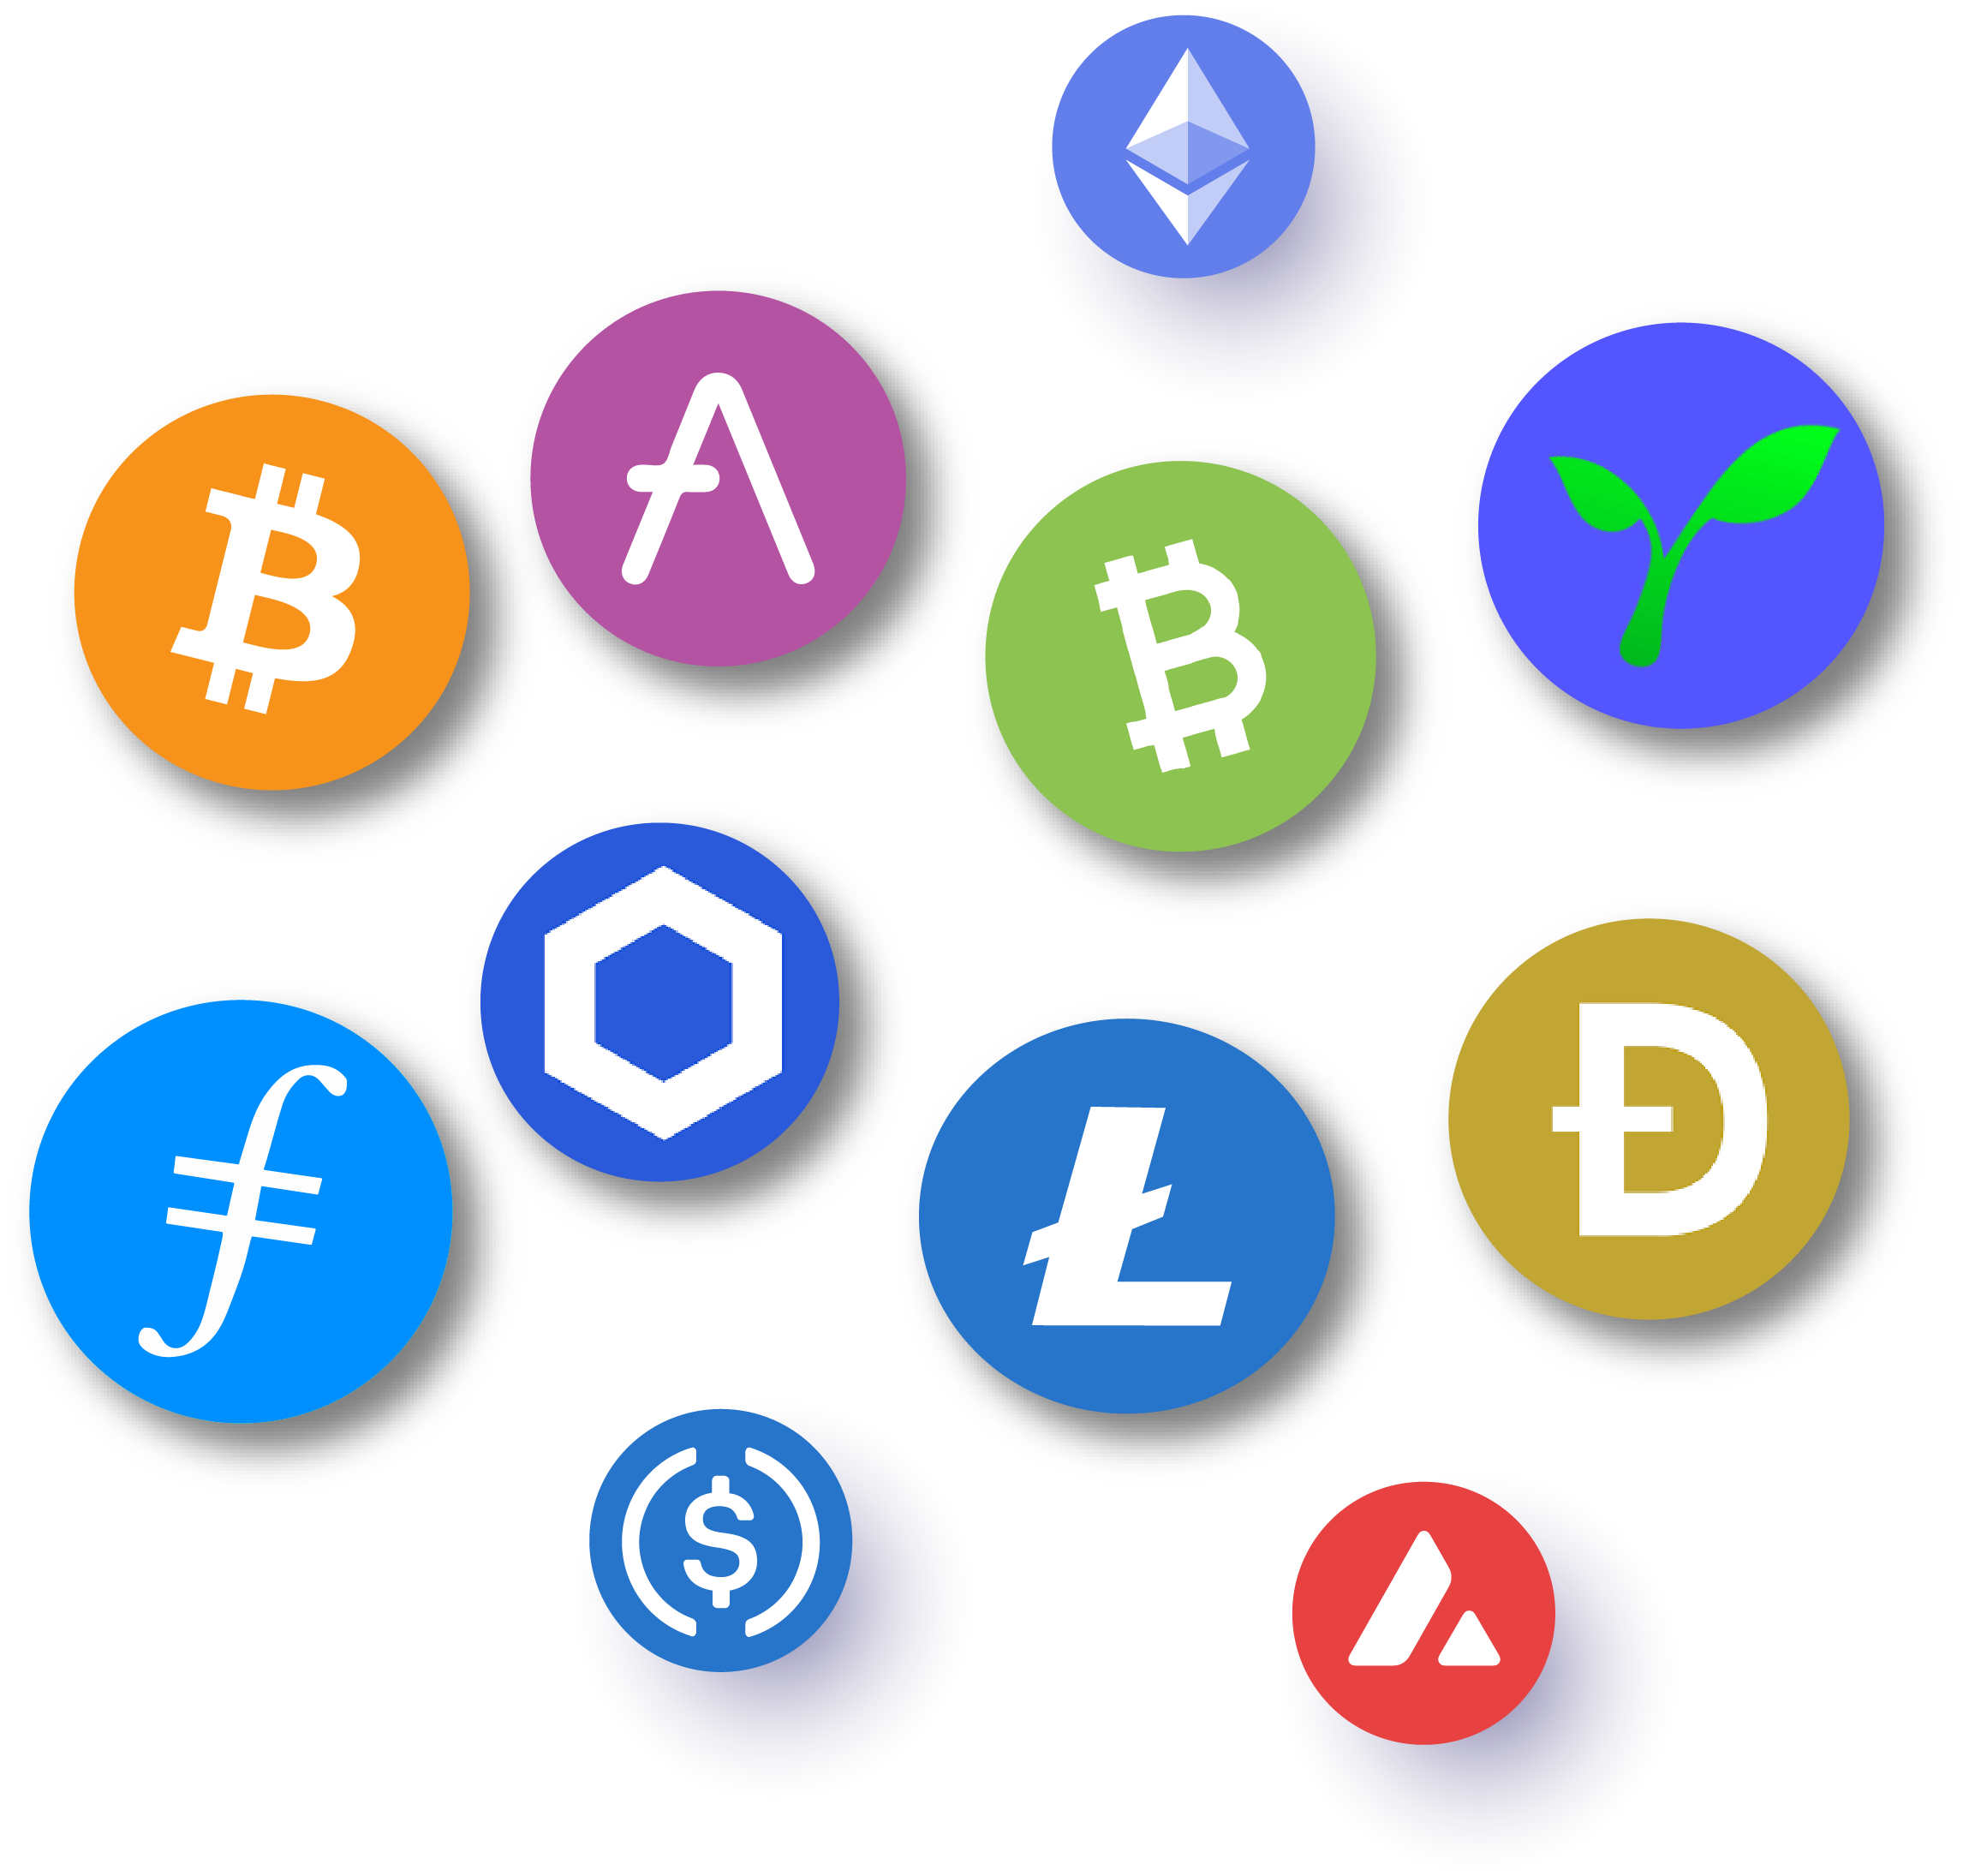 crypto bitcoin Ether dogecoin Litcoin and other icons